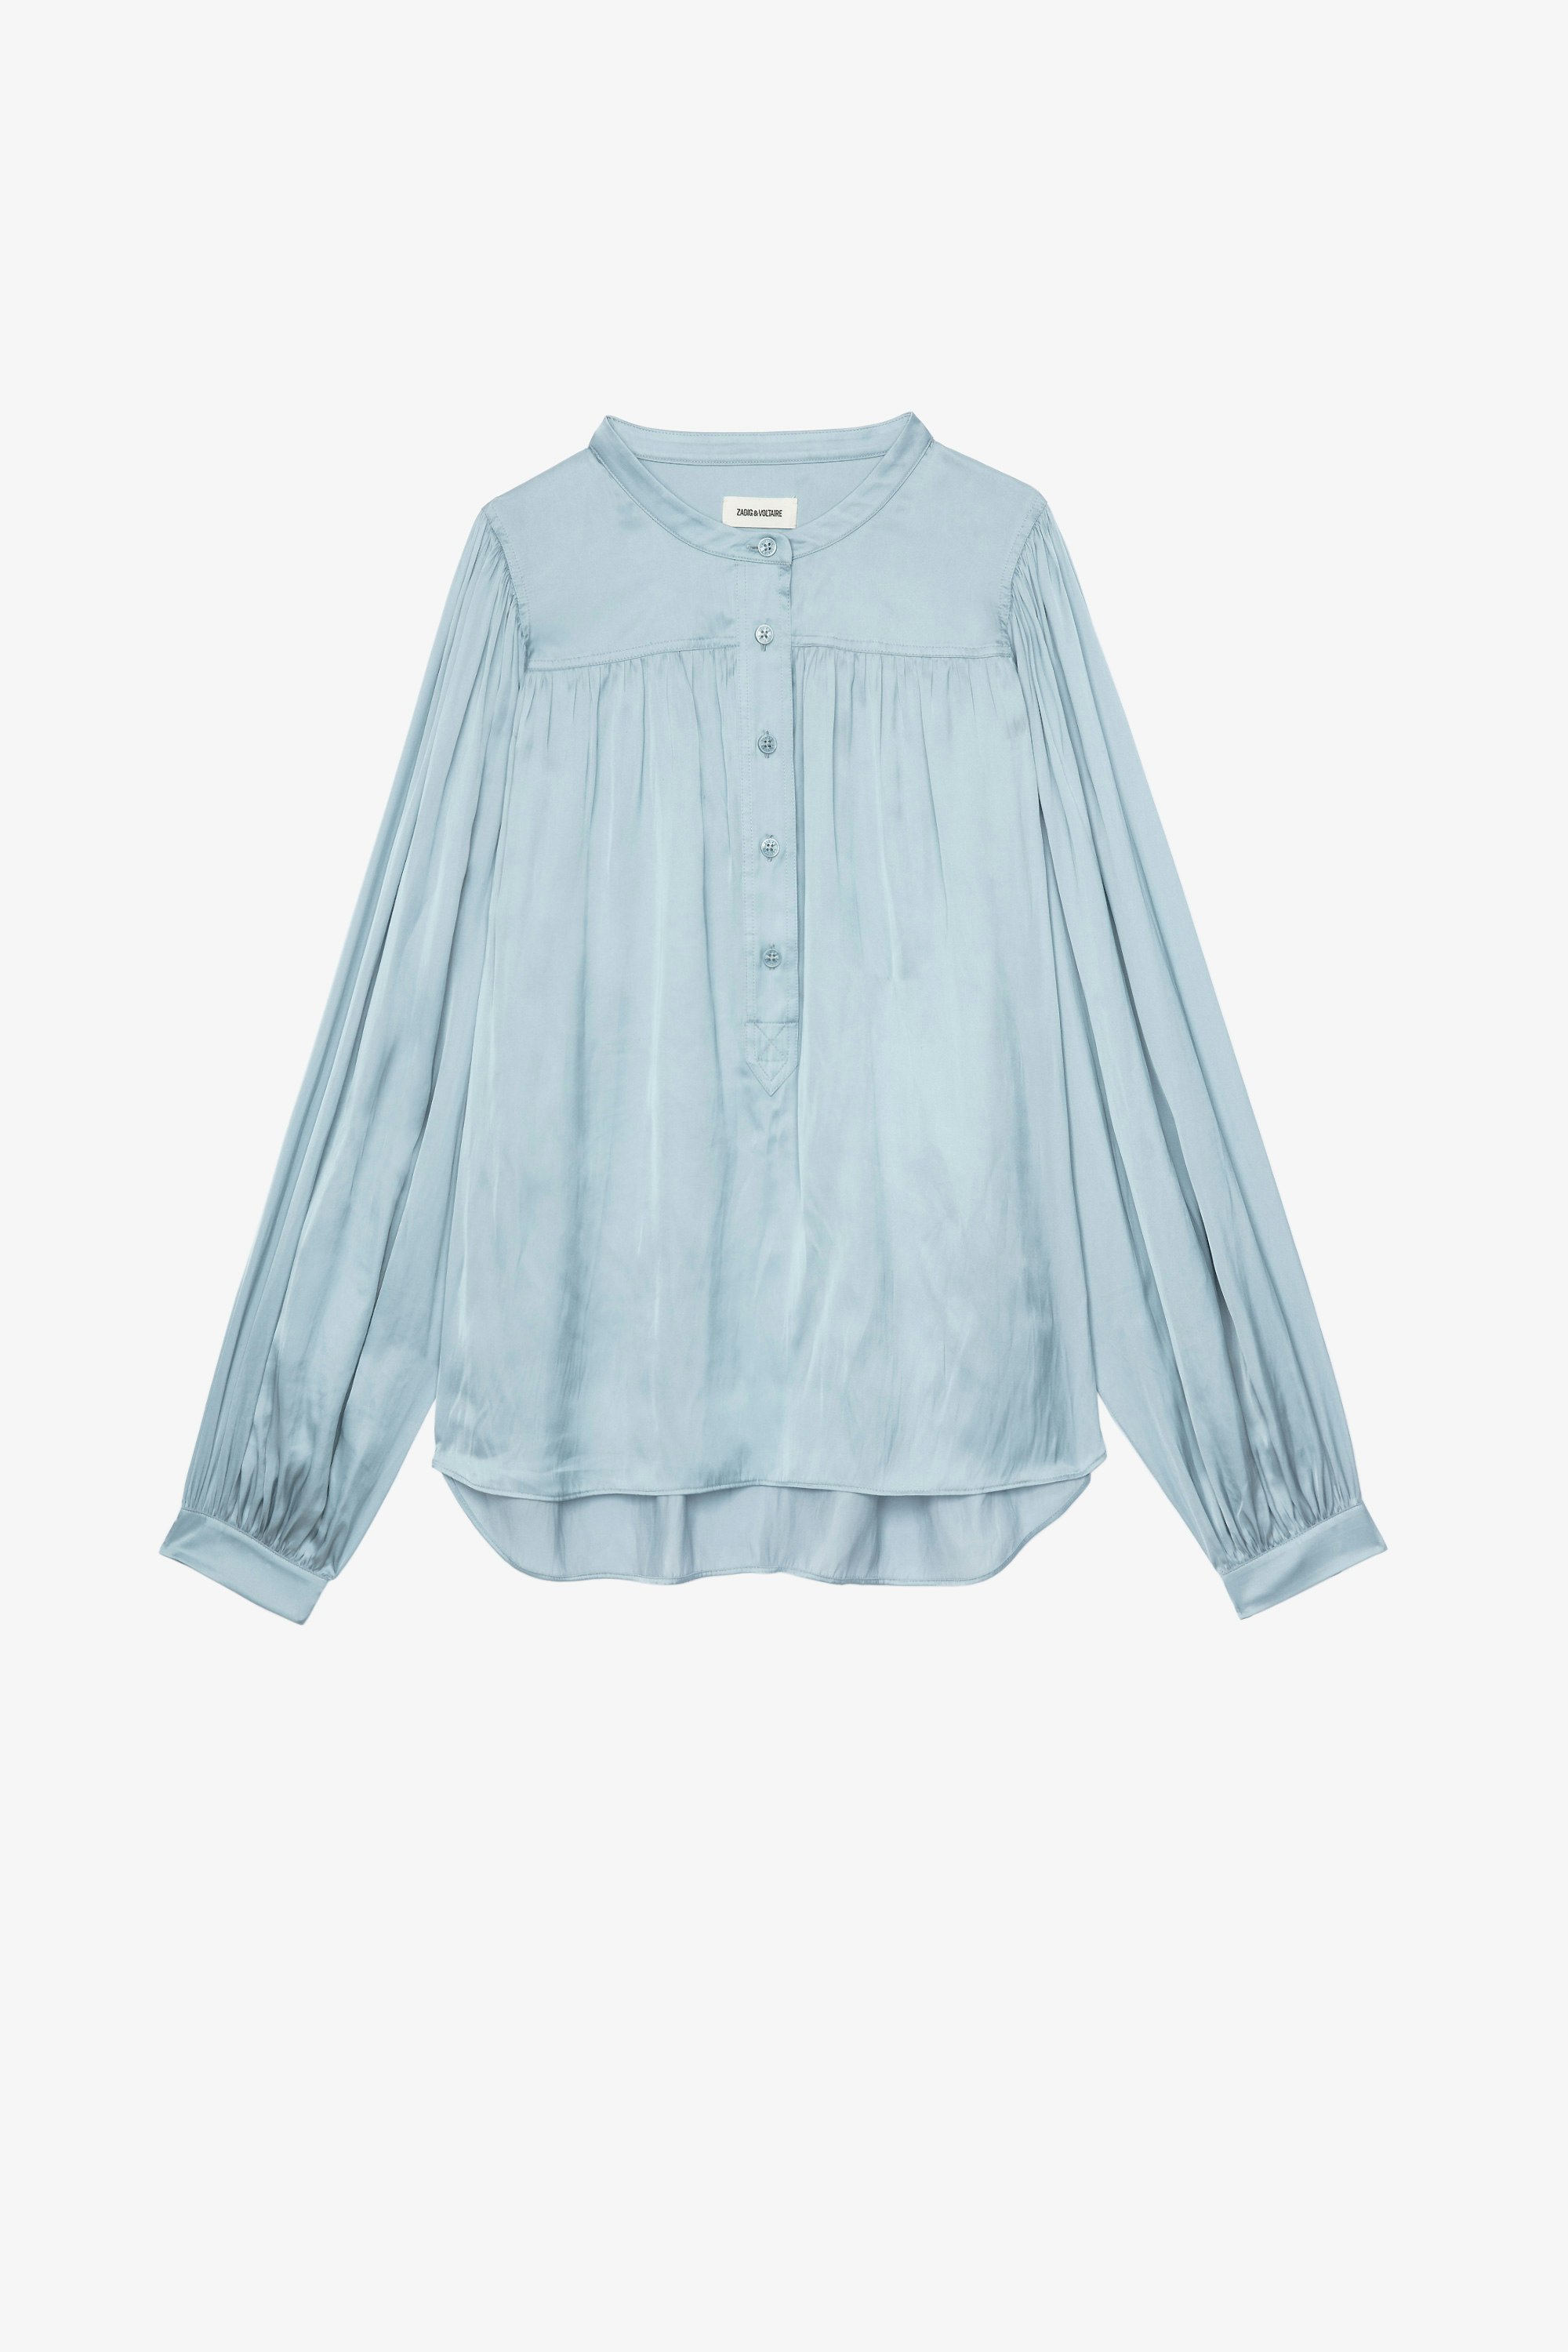 Tigy ブルーズ Sky blue satiny blouse with long puff sleeves 